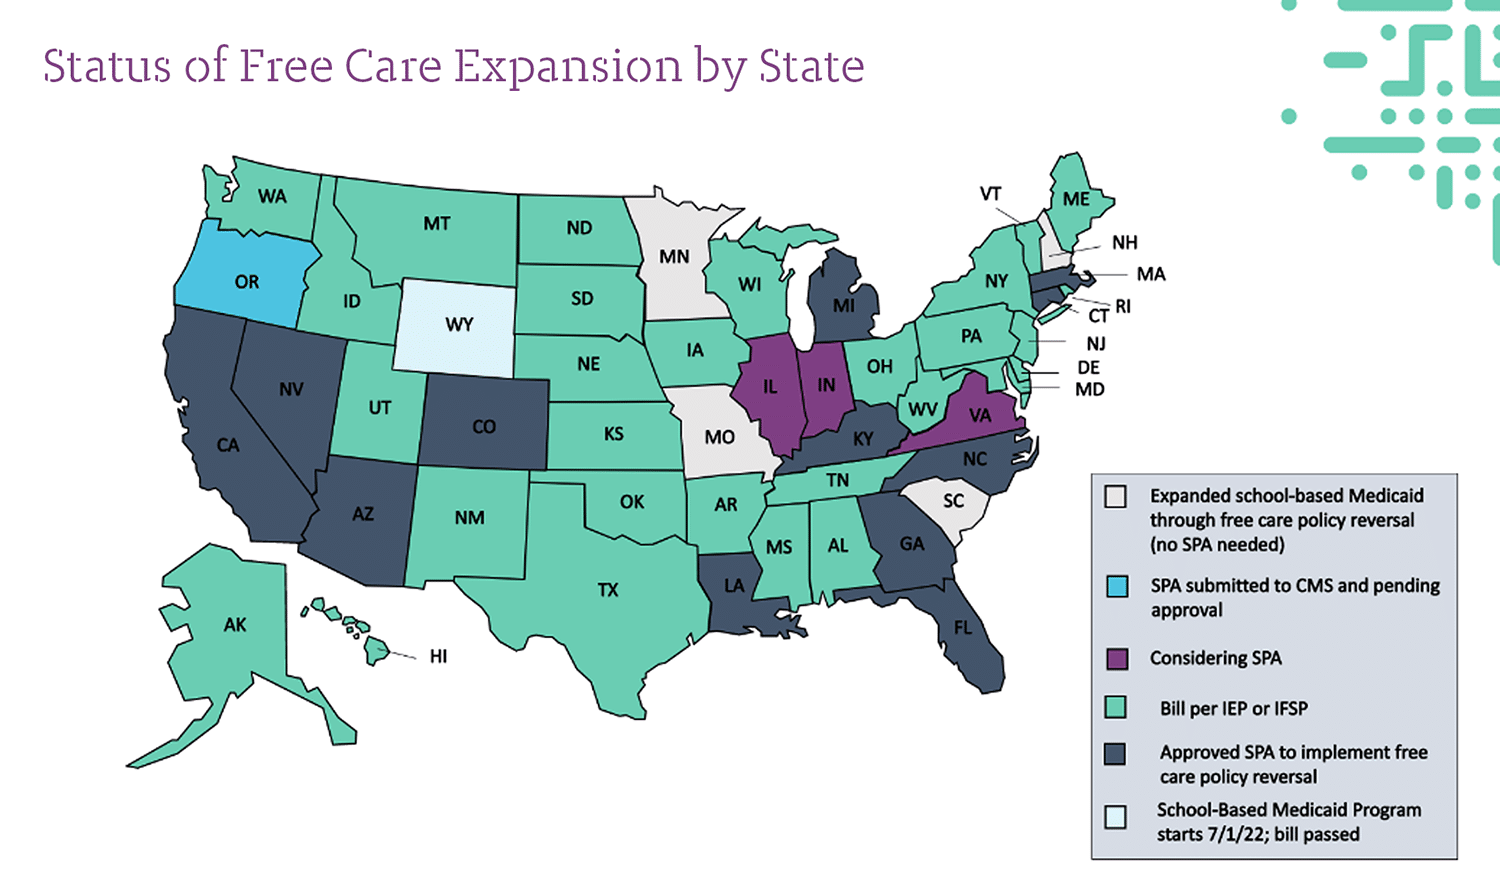 Status of Free Care Expansion by State-Frontline Education